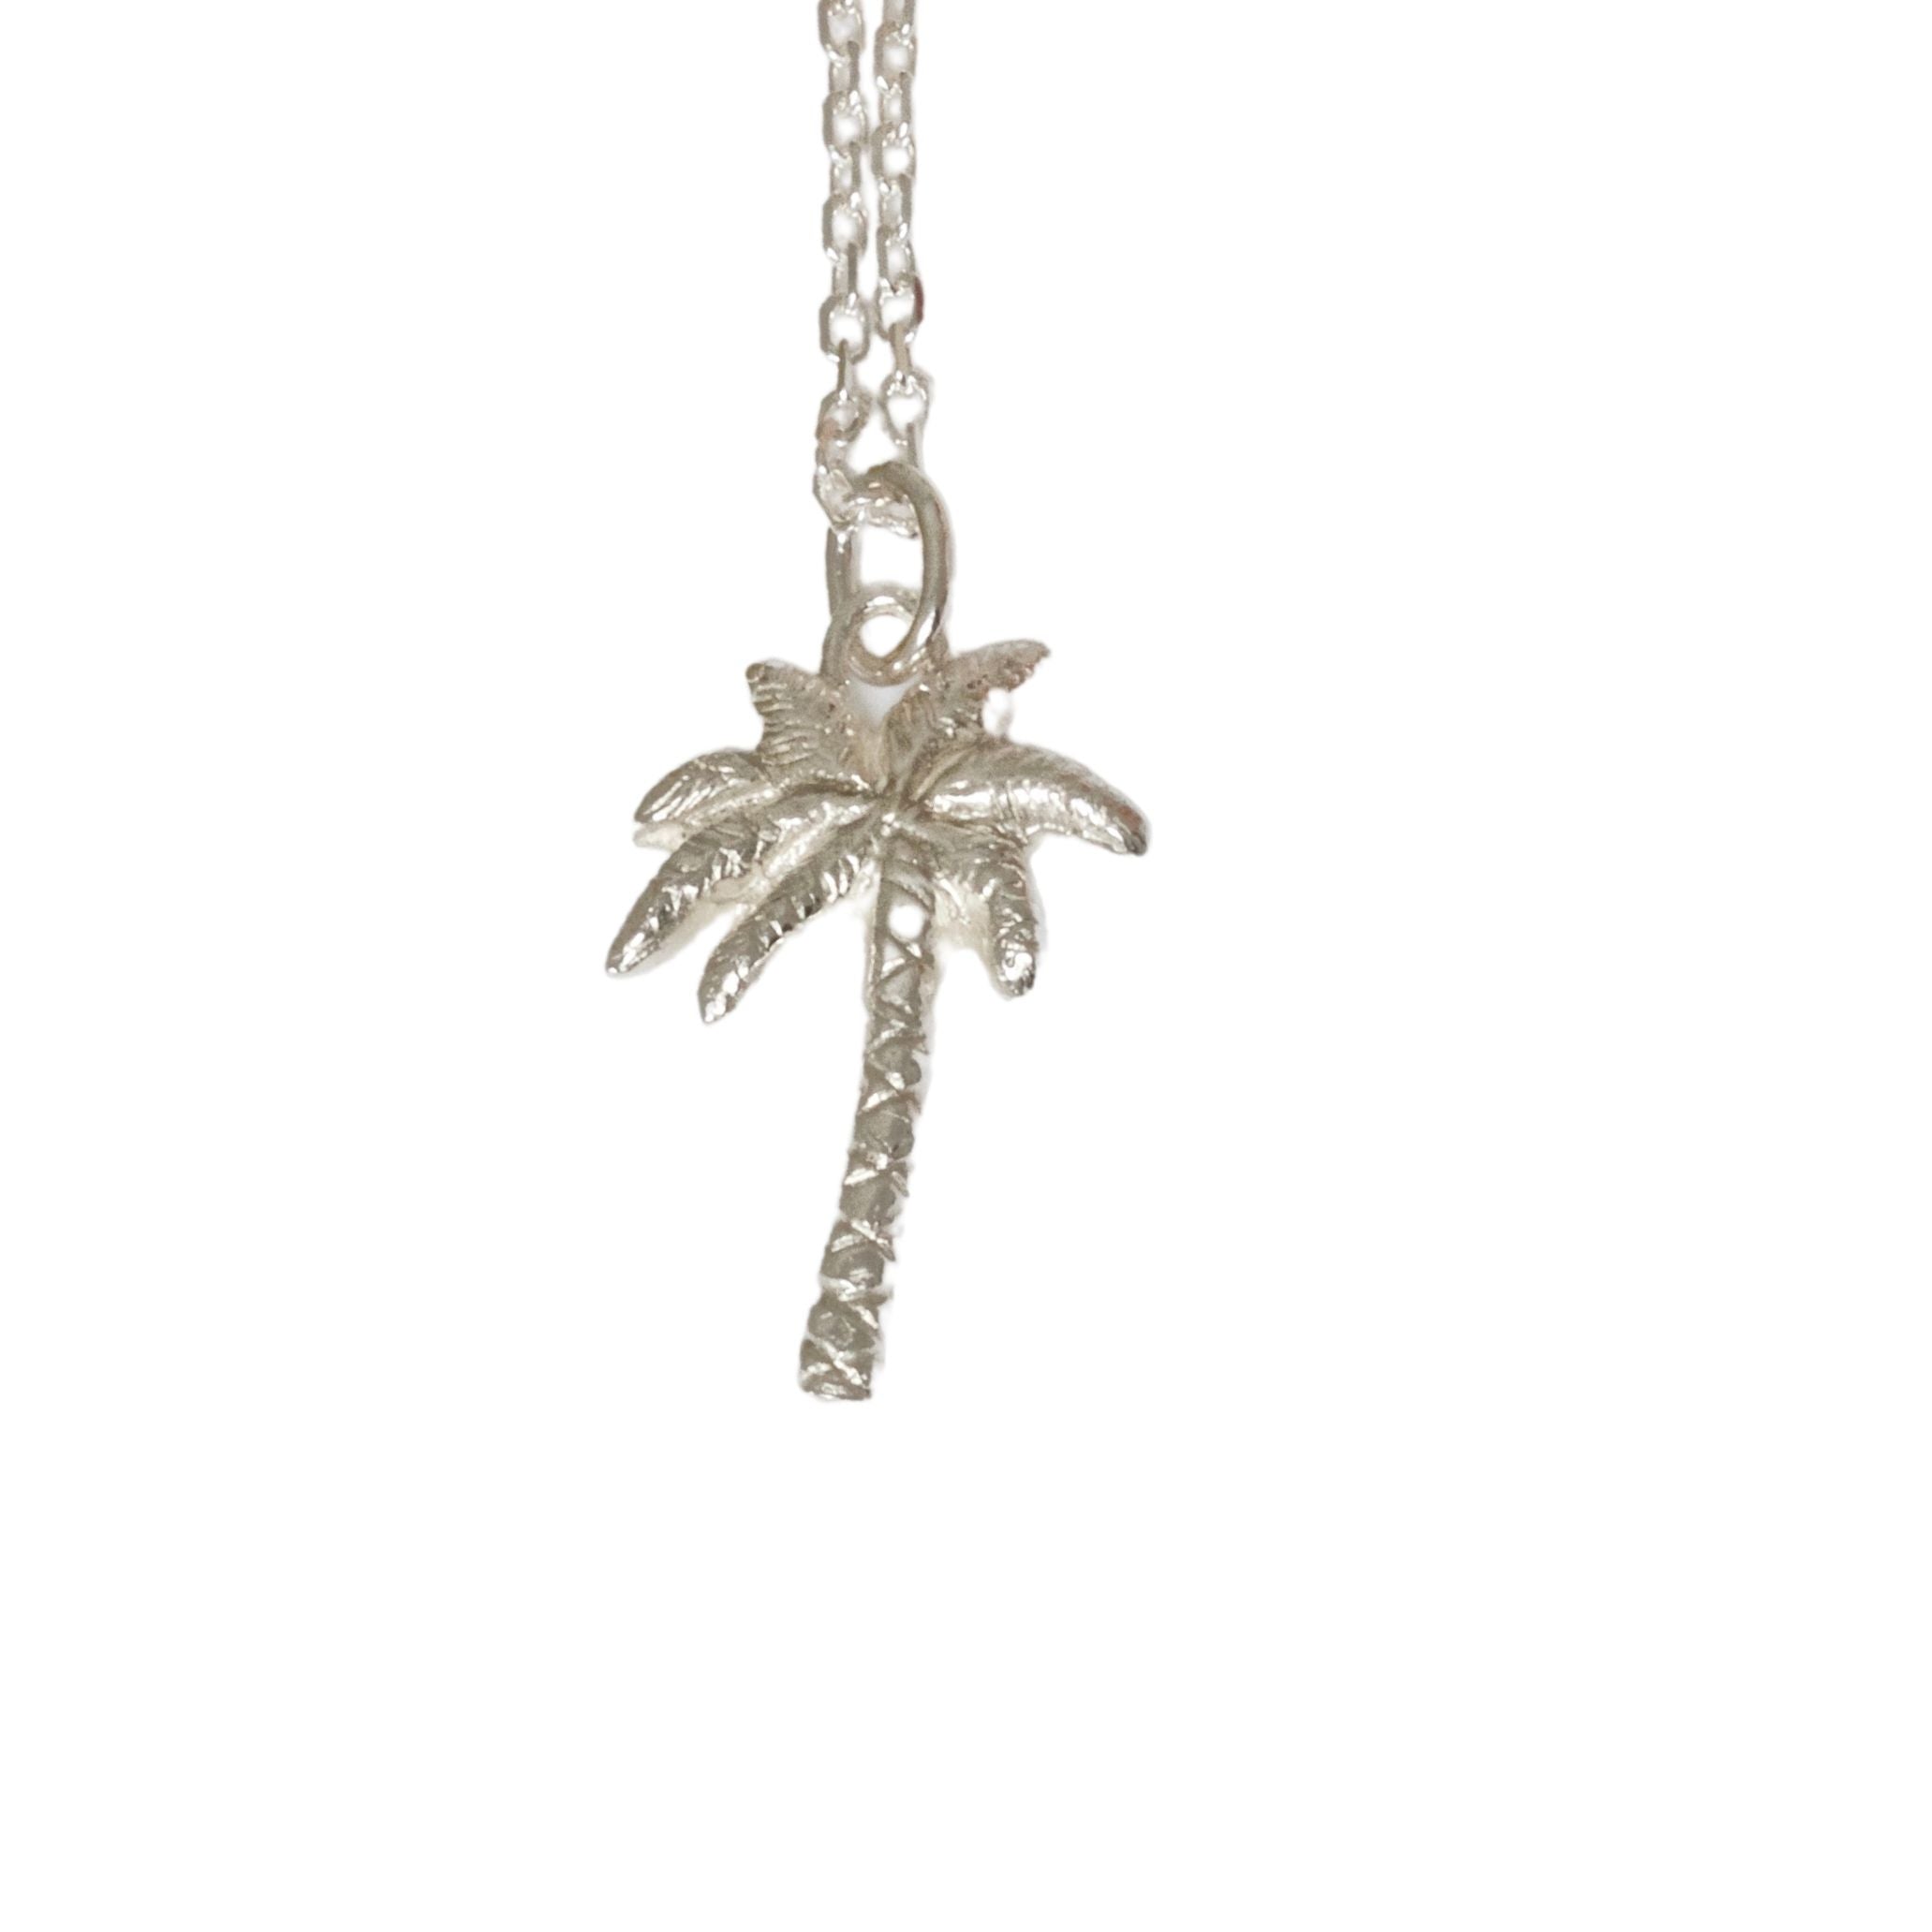 Imperial 1/20Ct TDW Diamond Palm Tree Necklace in S925 Sterling Silver -  Walmart.com